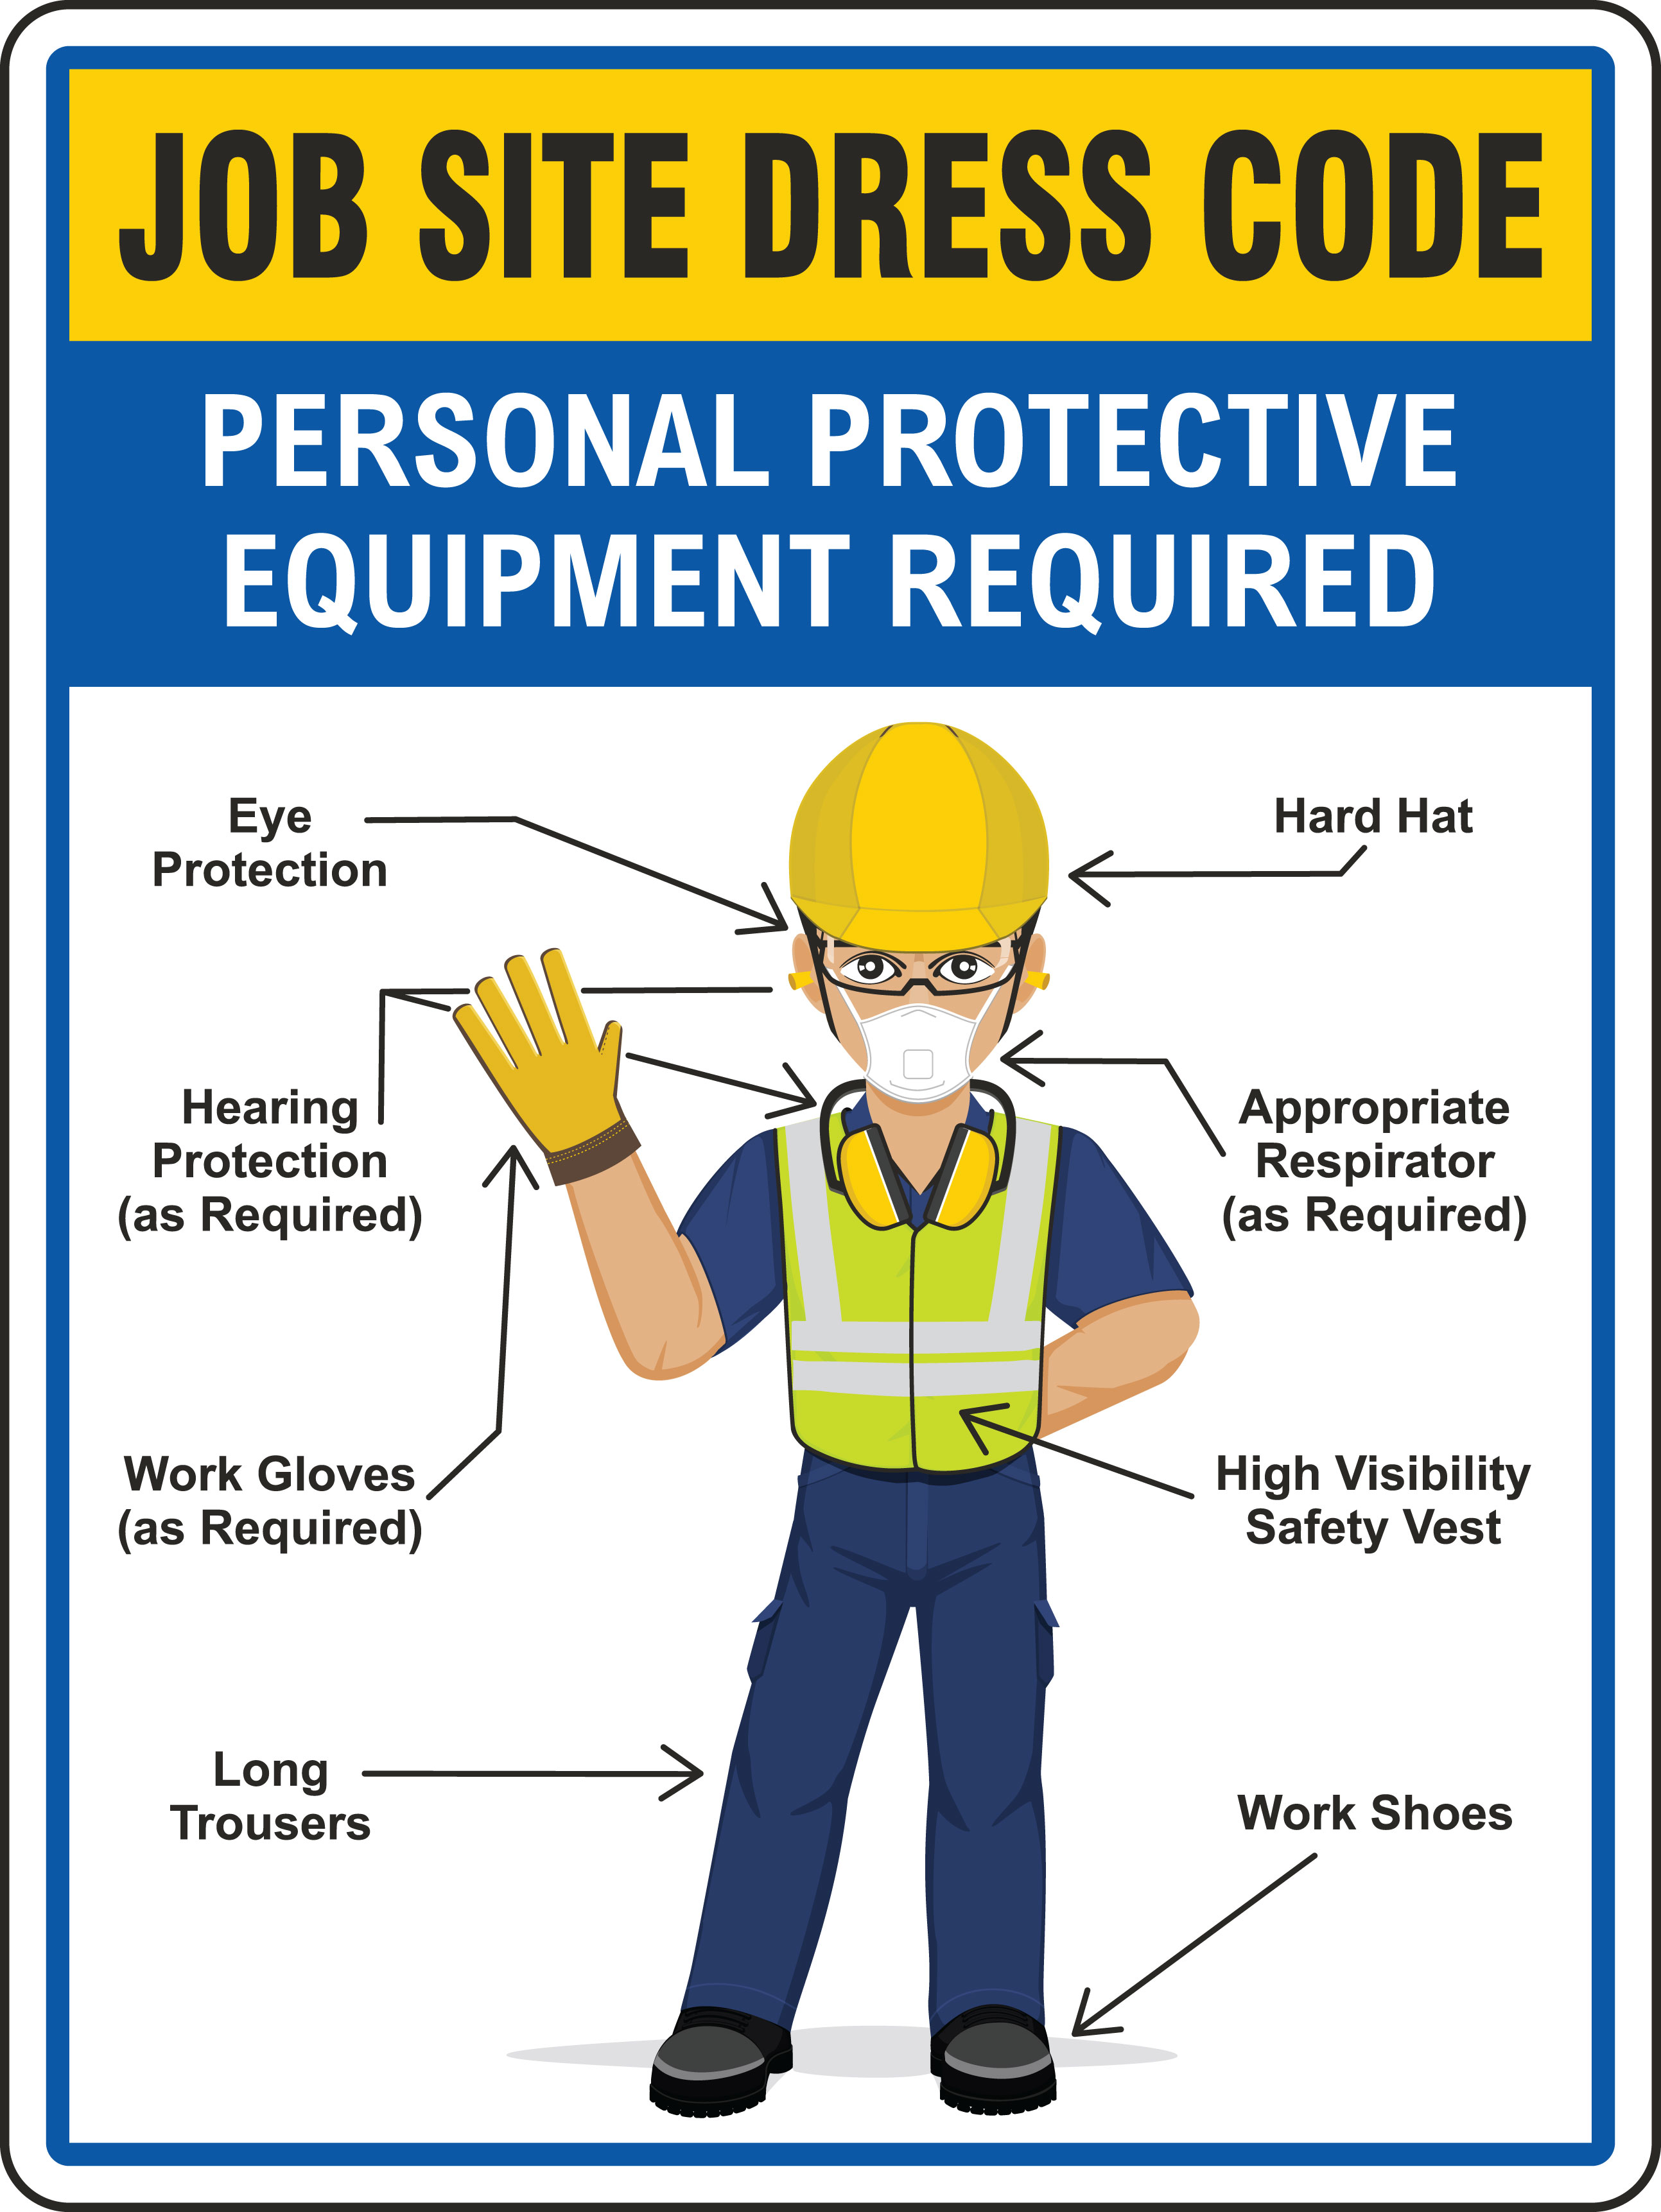 Job Site Dress Code Min Ppe Sign Save 10 Instantly